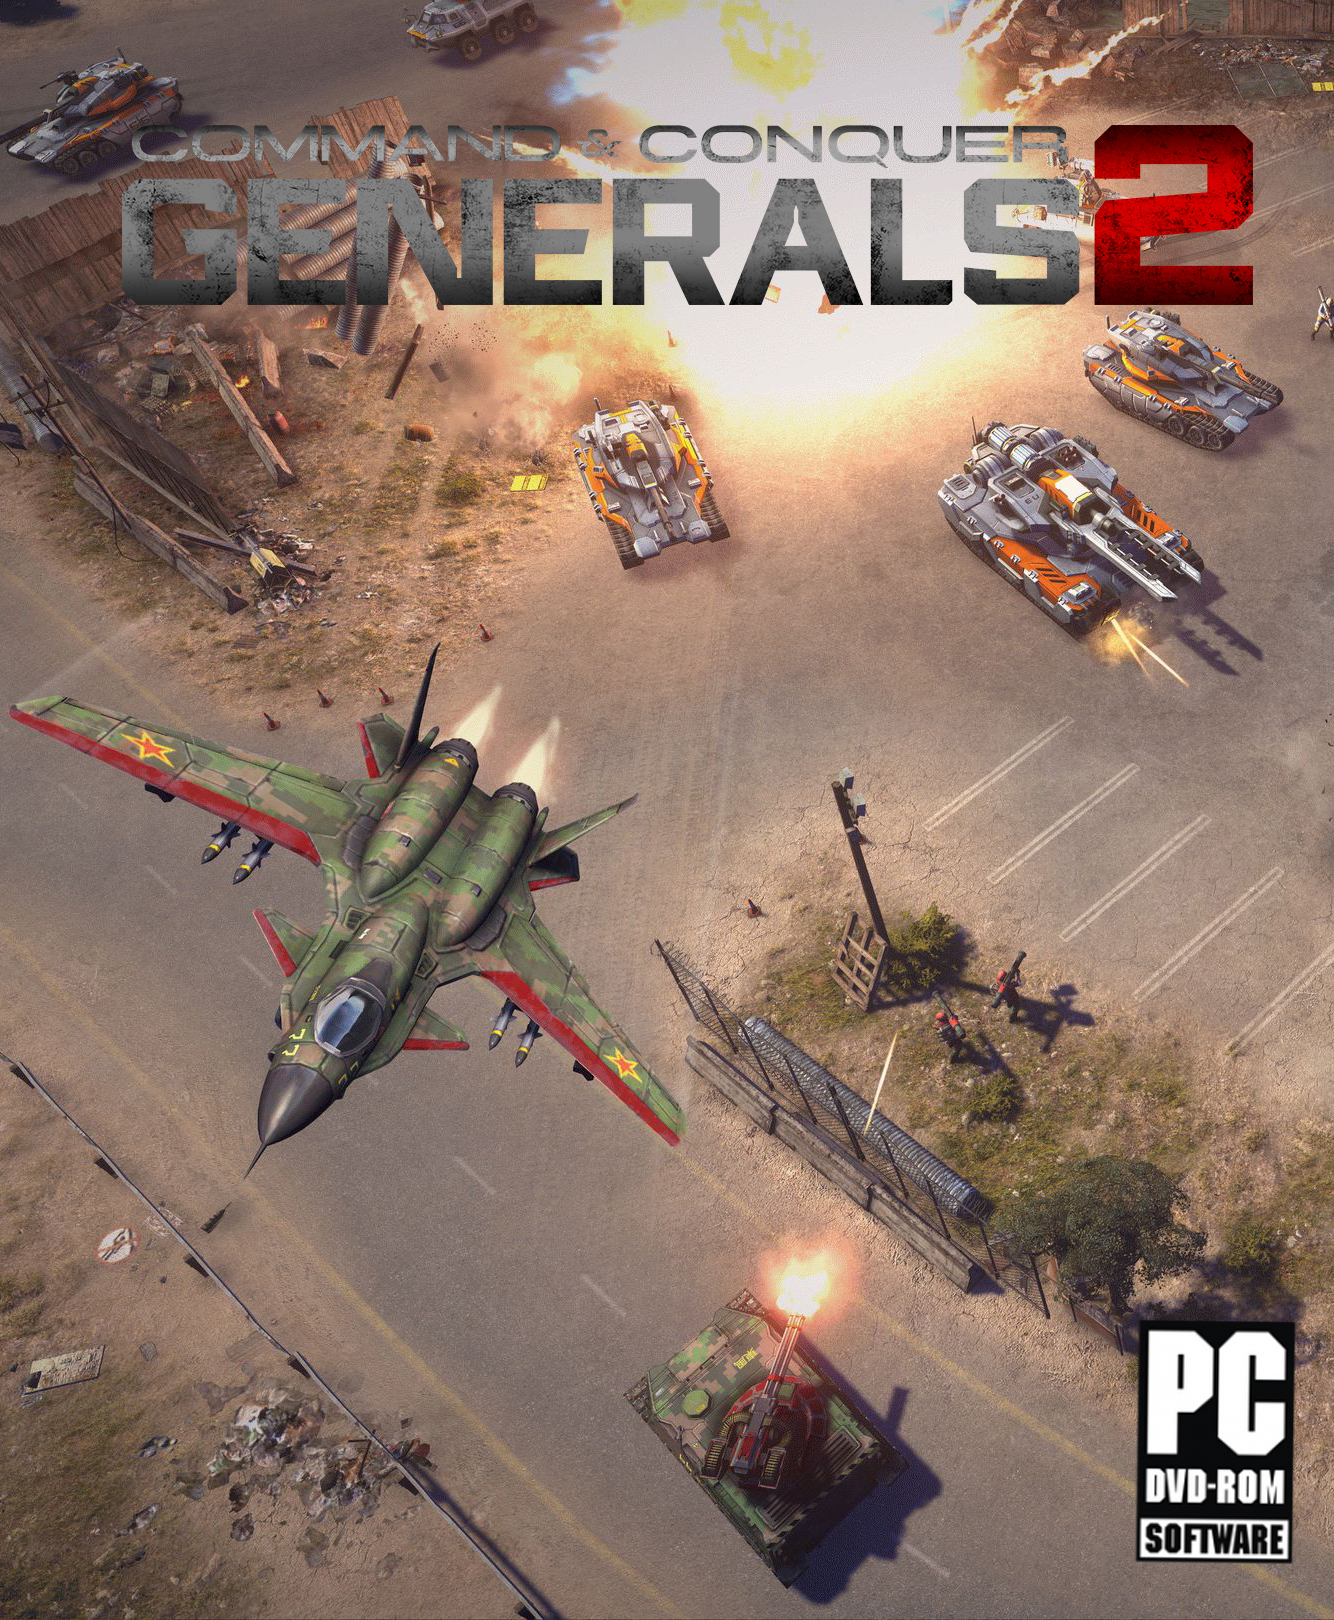 command and conquer generals 2 free download full version mac